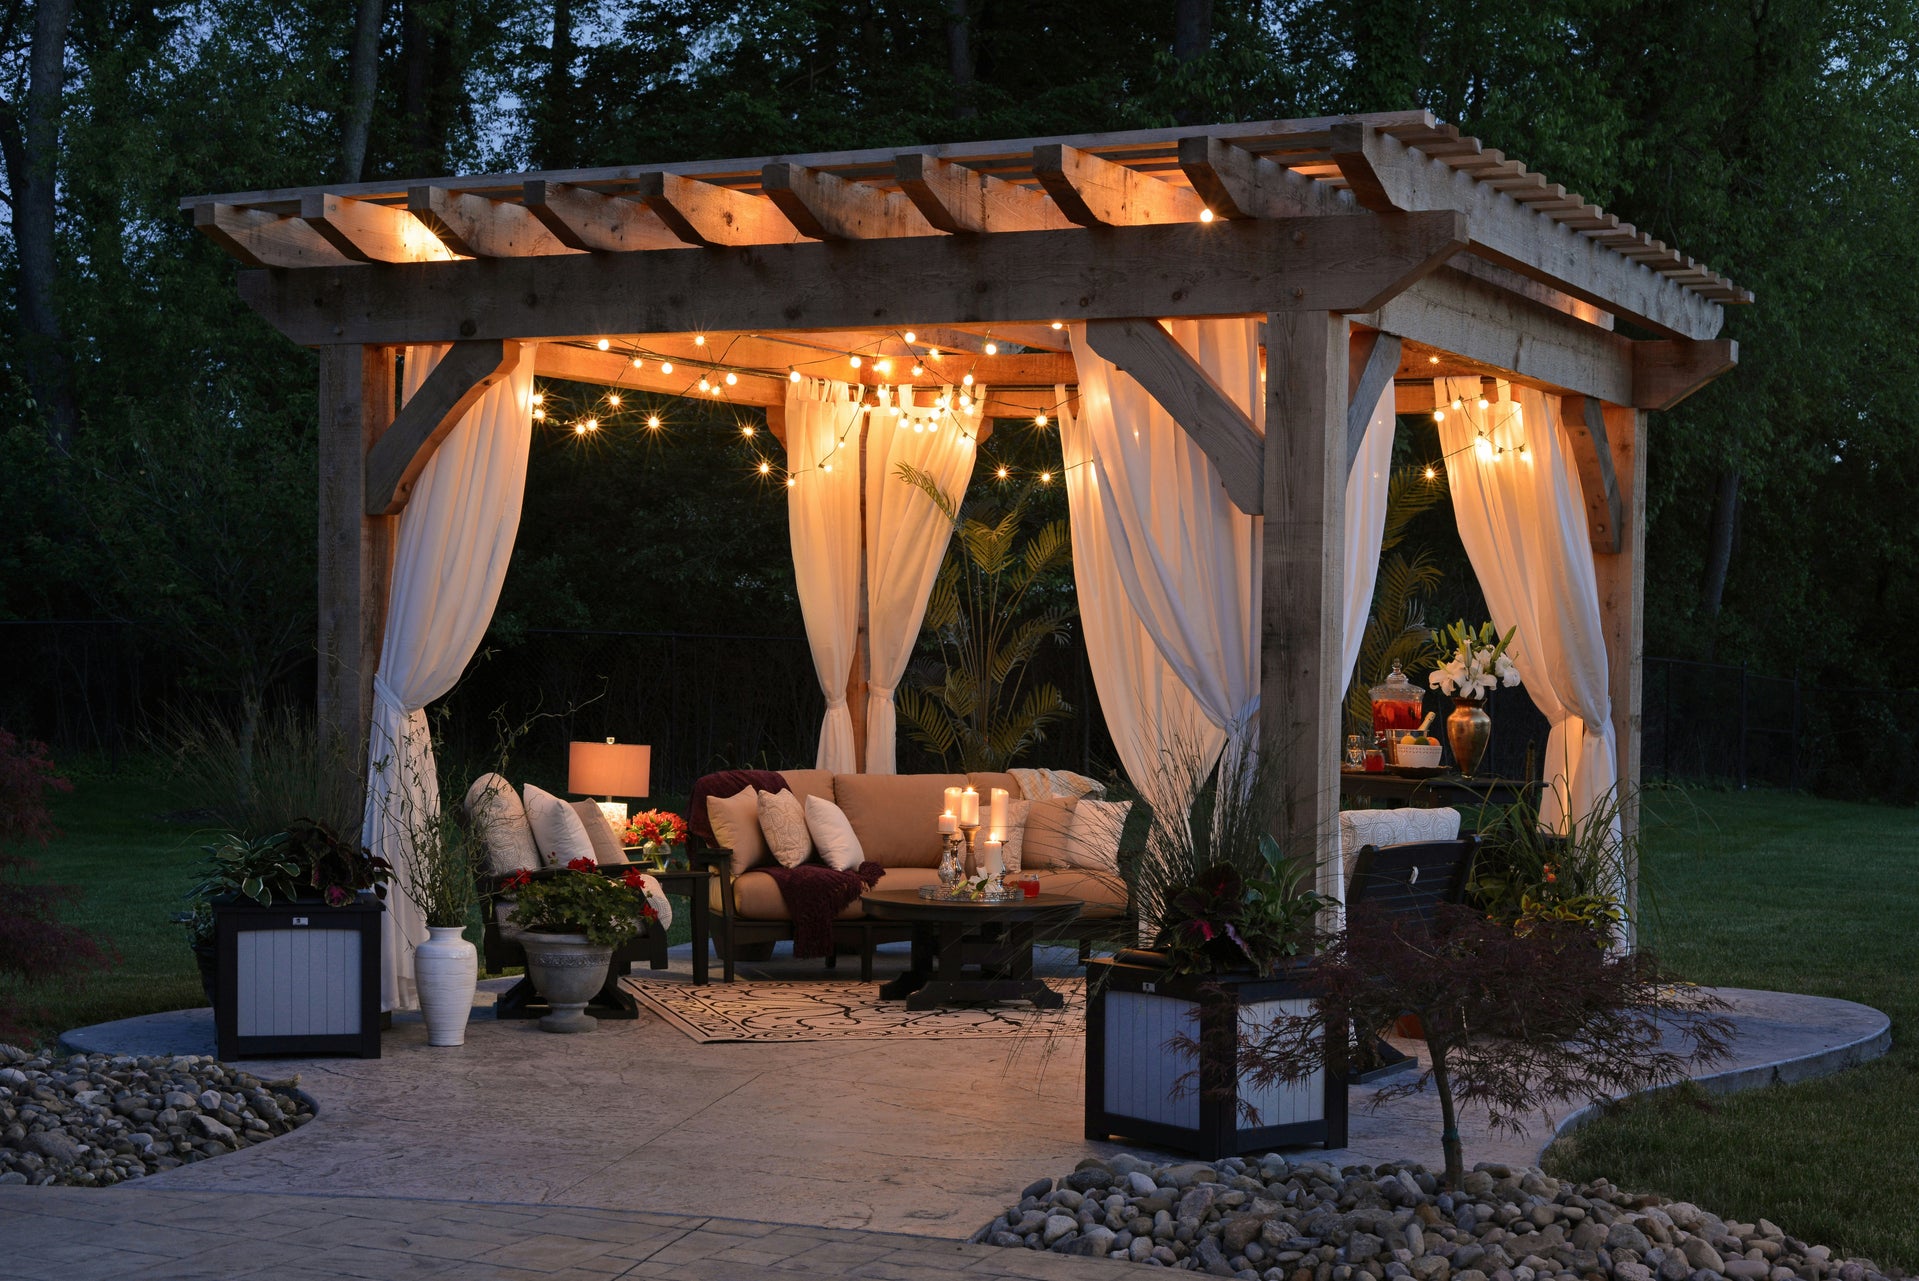 Chesapeake Homes The Ultimate Guide to Creating Your Dream Outdoor Living Space